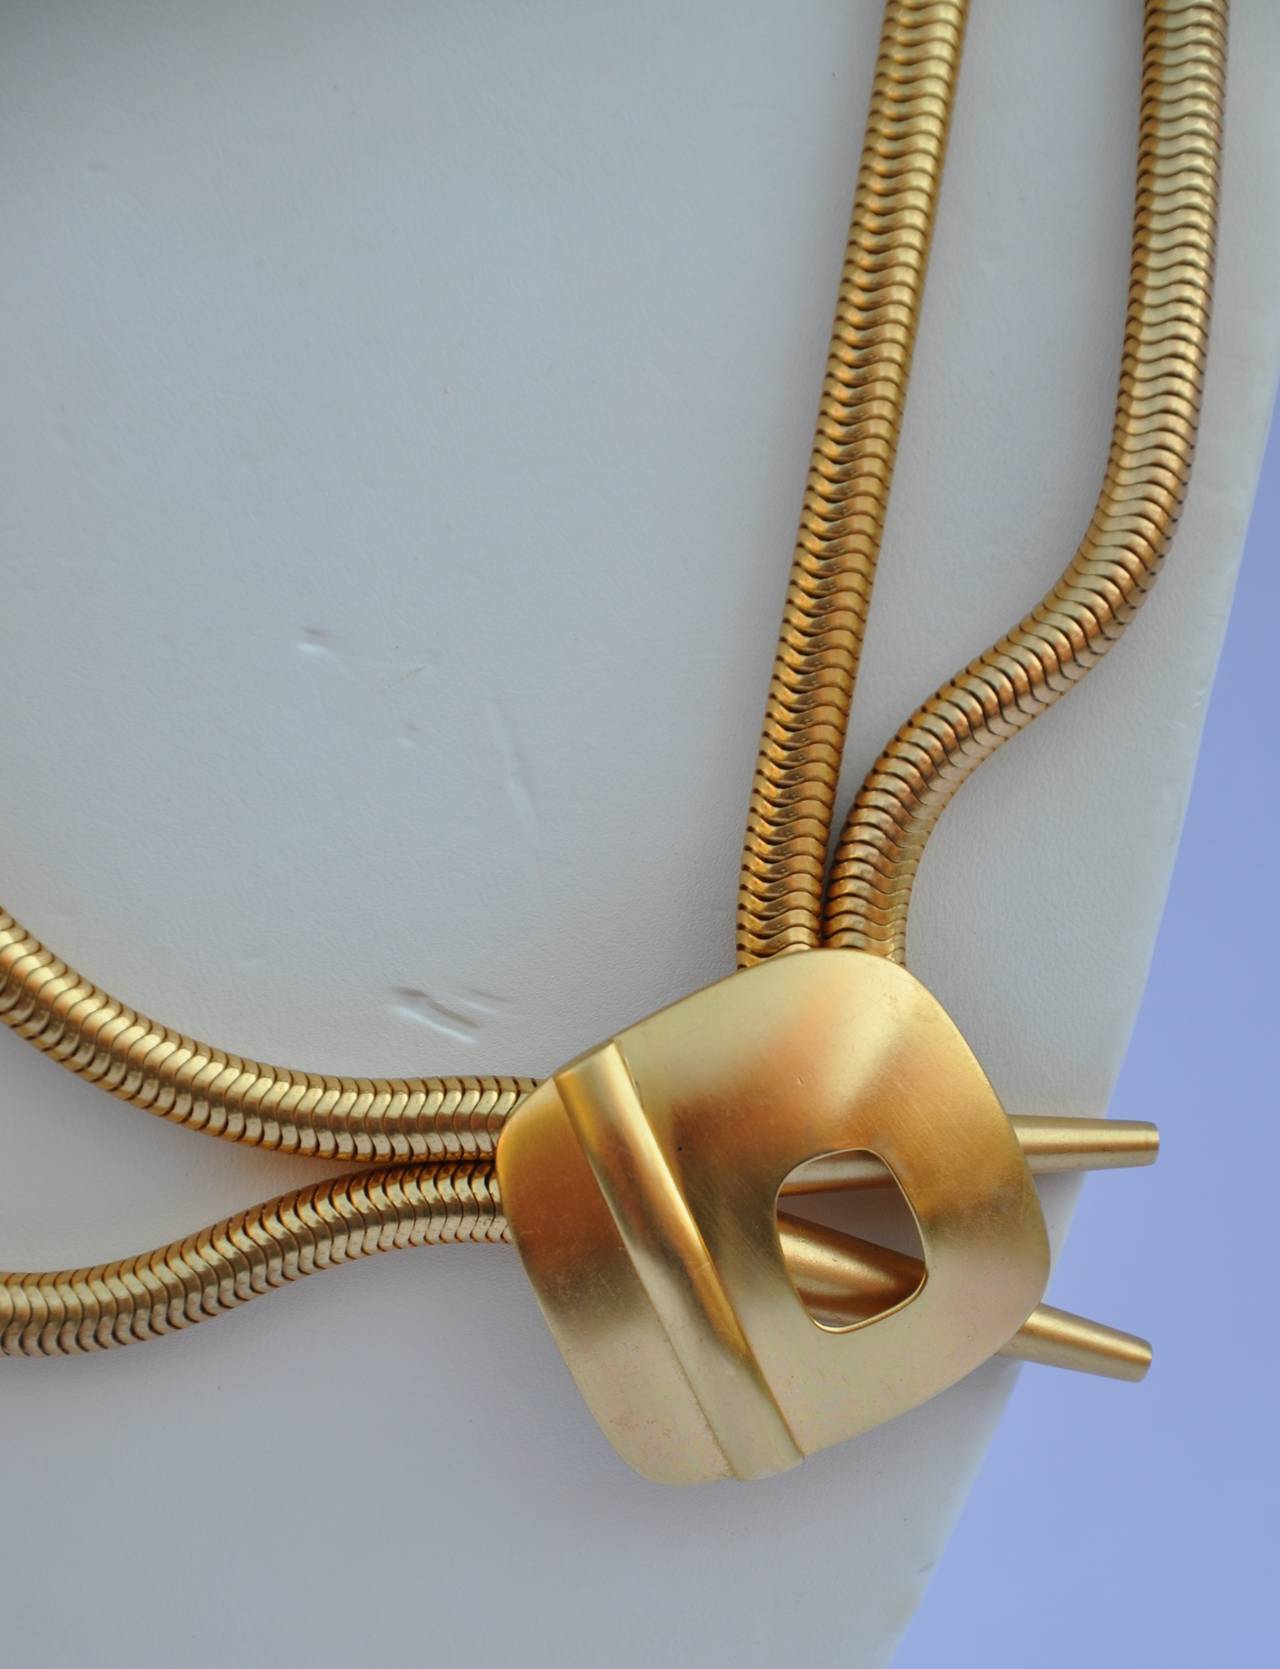 Bold gilded gold vermeil finish snake chain necklace measures 181/2" along the inner side and 24" along the outer side. The pendant itself measures 1 1/2" x 1 1/2".